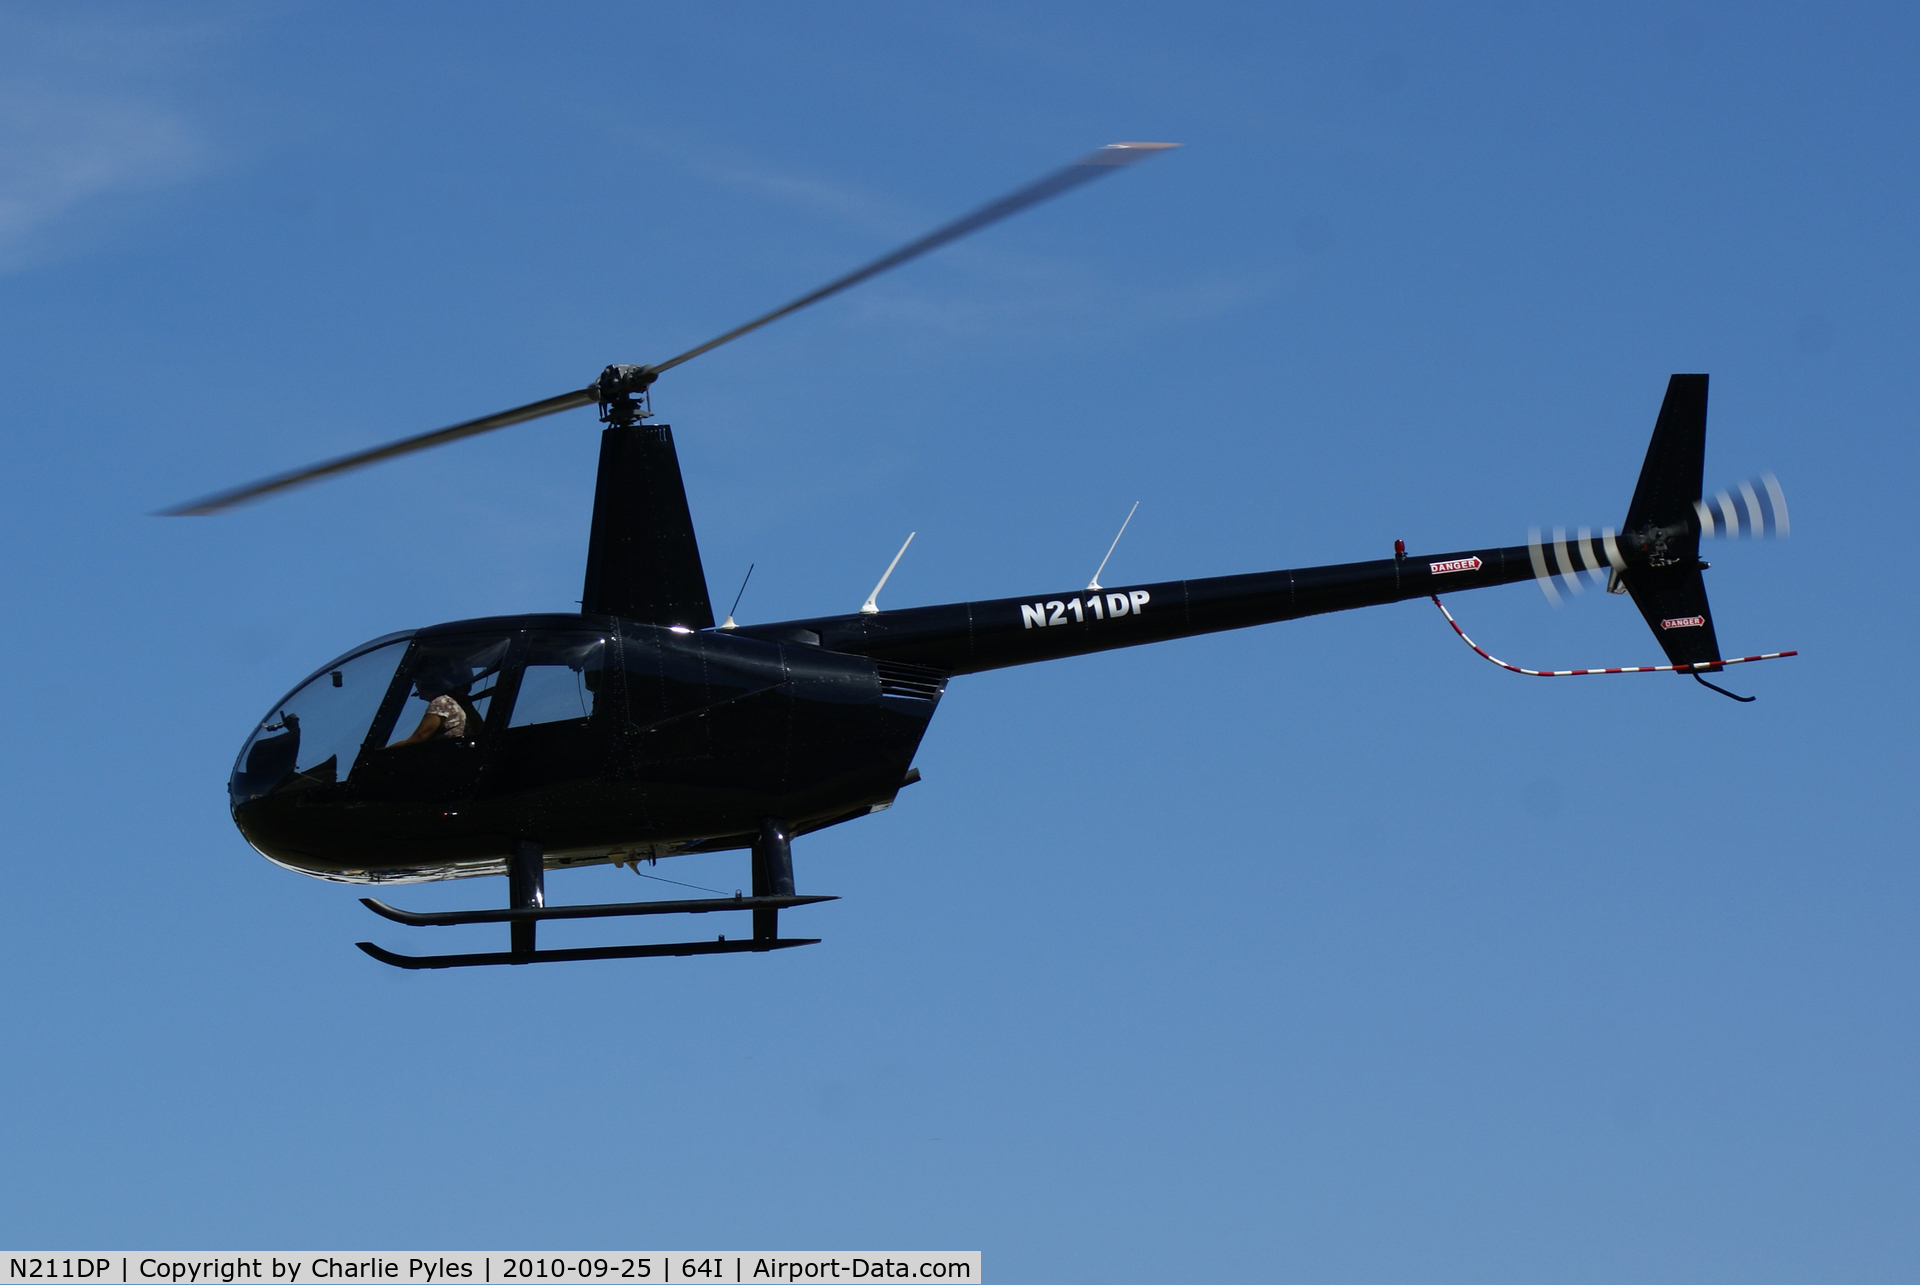 N211DP, 2006 Robinson R44 II C/N 11556, First shot of this one on A-D.com